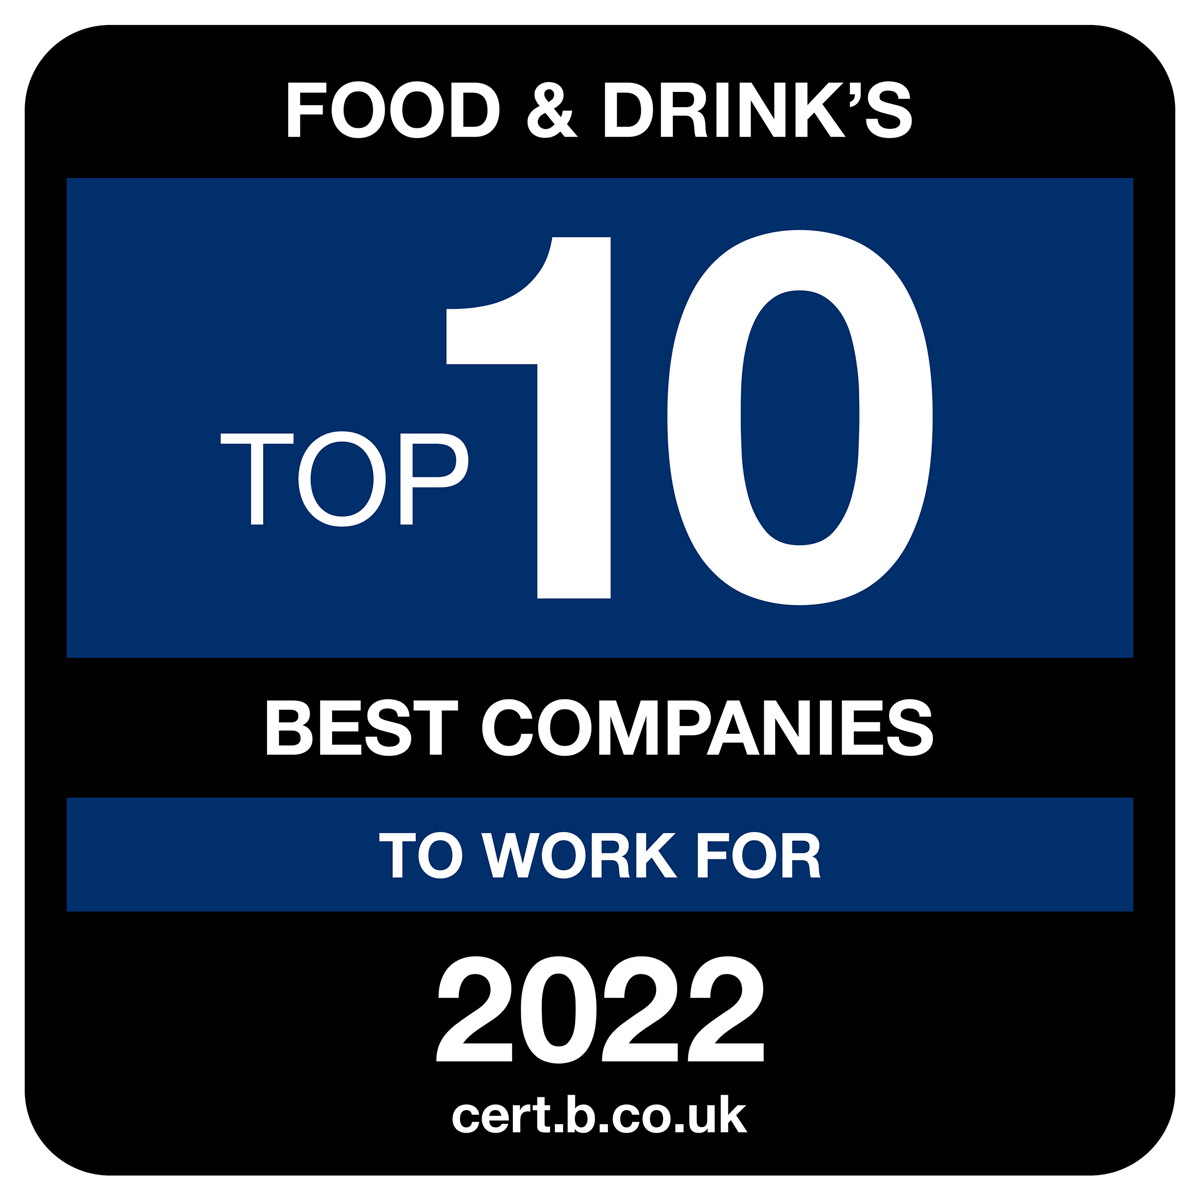 A sign that says top 10 best companies to work in Food and Drink for 2022.